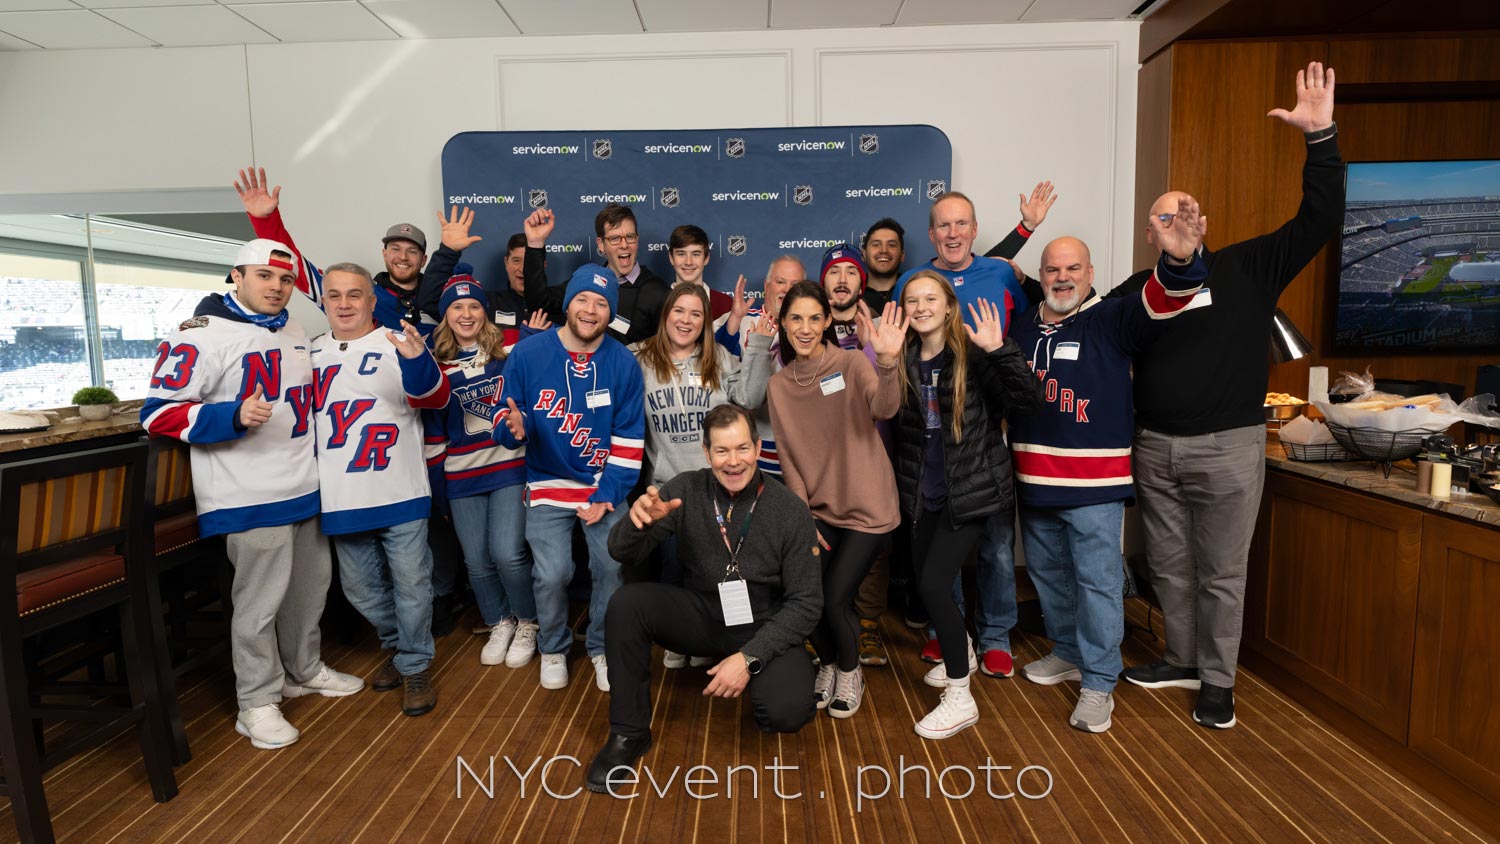 NJ New Jersey event photographer step & repeat